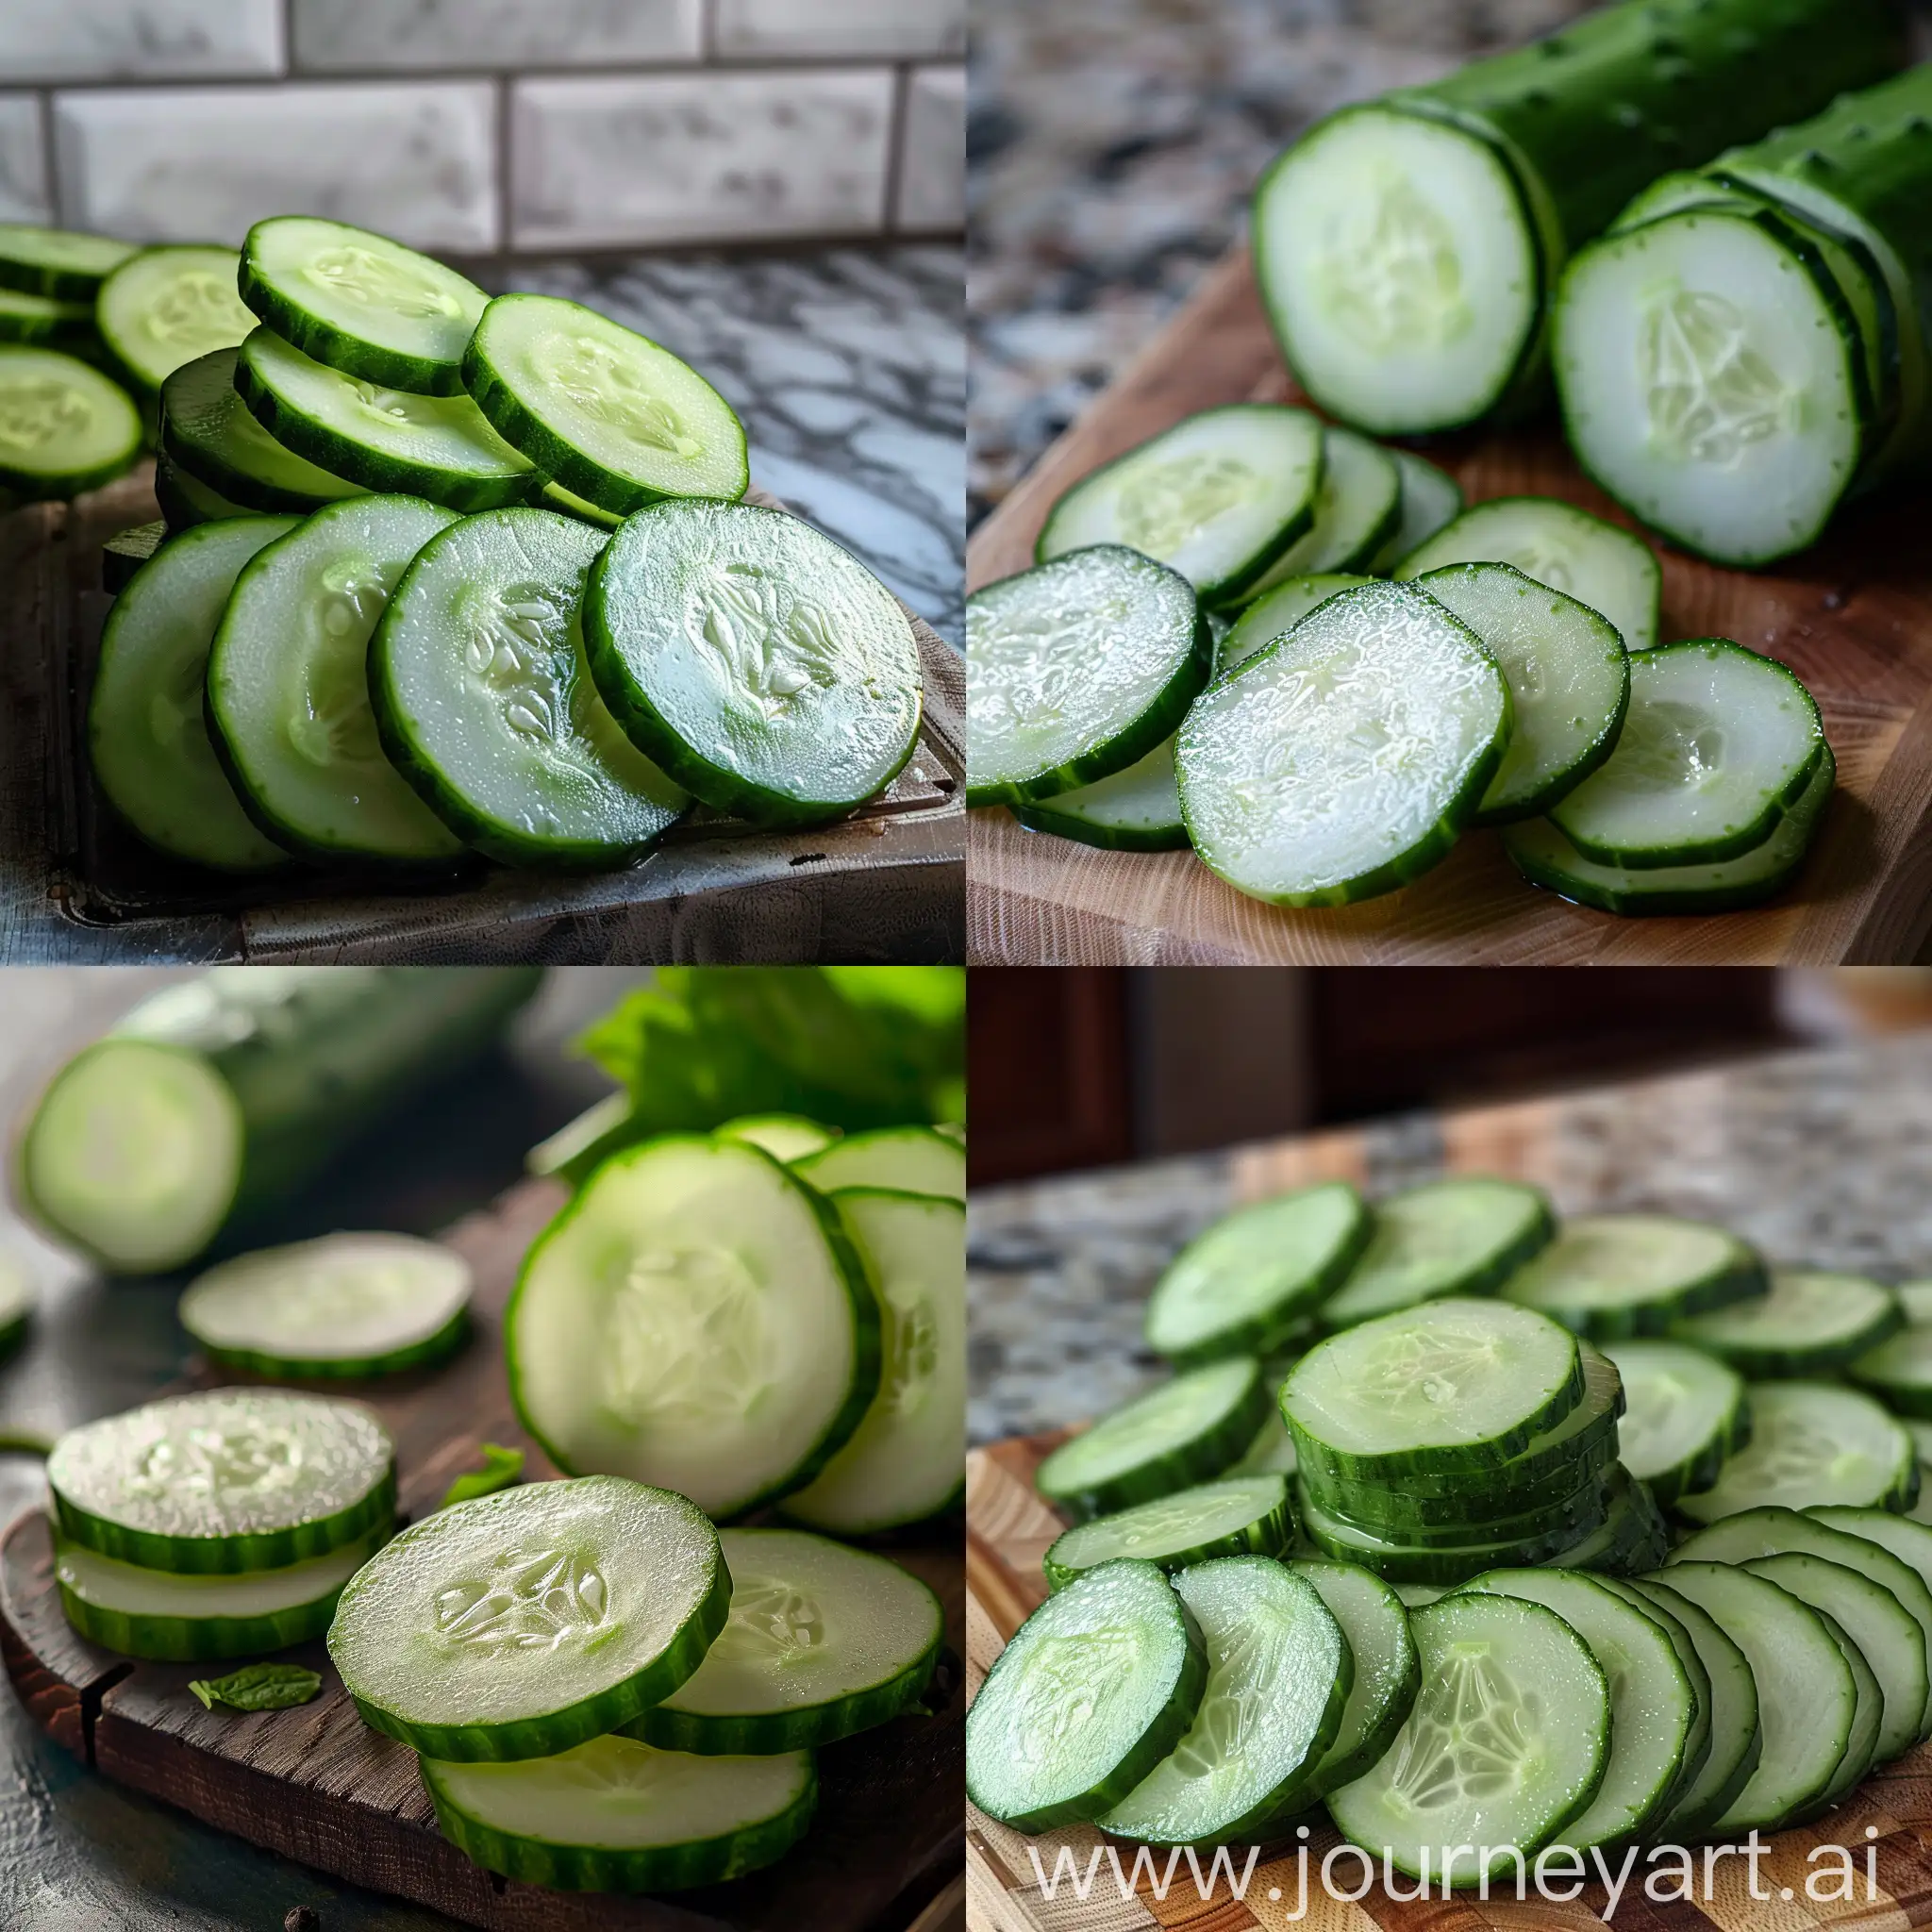 Real natural light shot of some sliced cucumbers on a kitchen board.